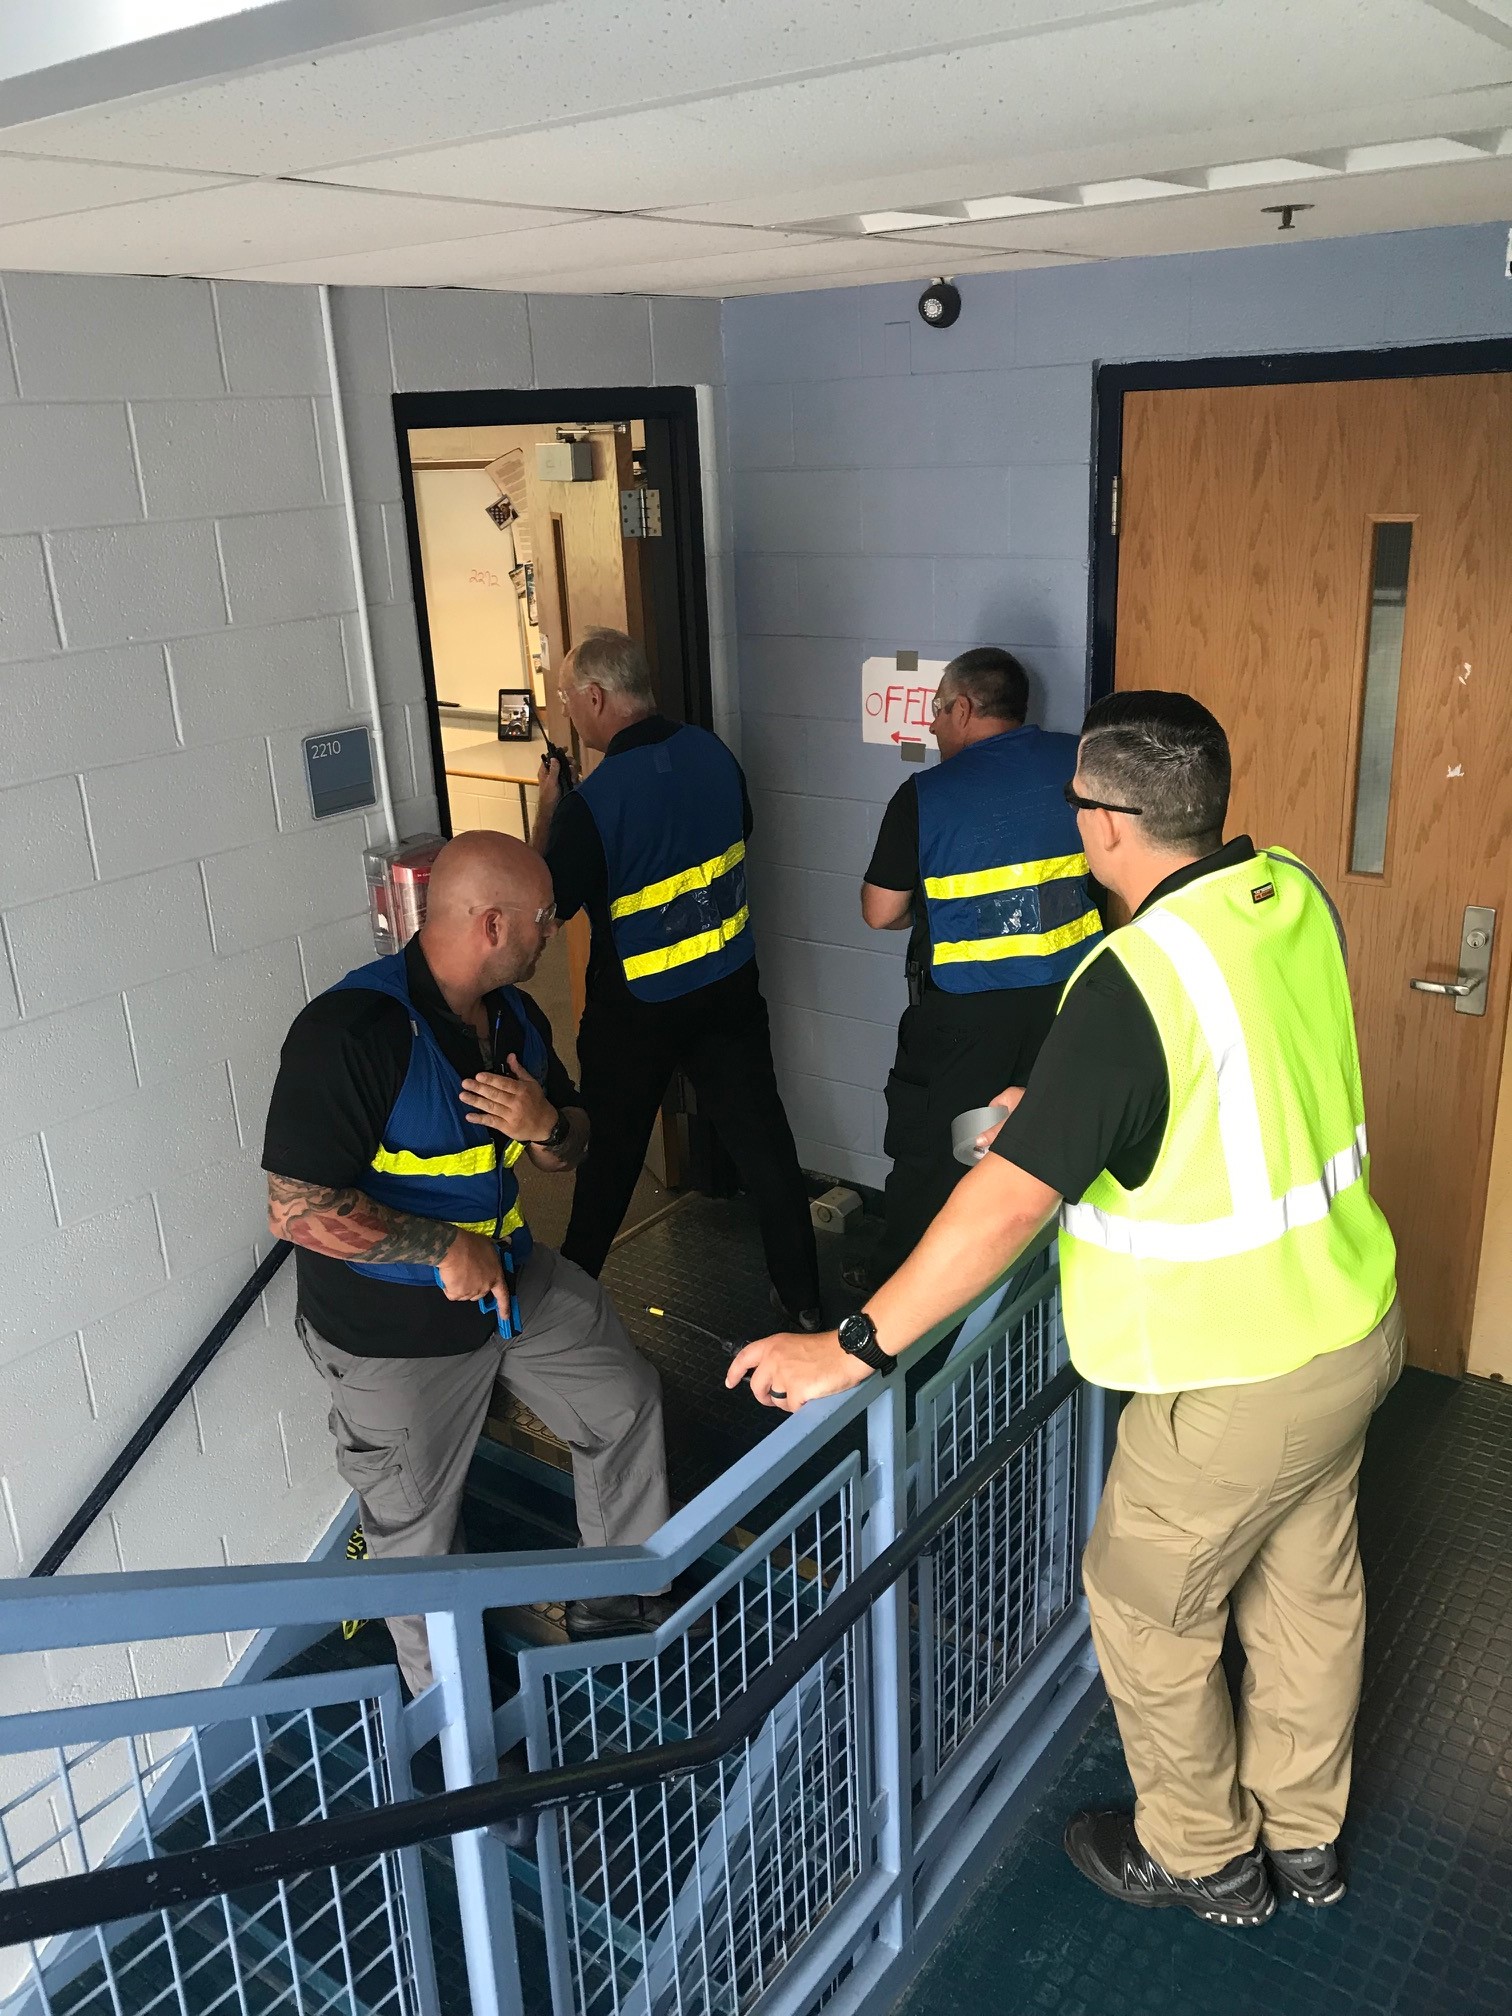 Civilian Response to Active Shooter Events (CRASE) Train-the-Trainer Course